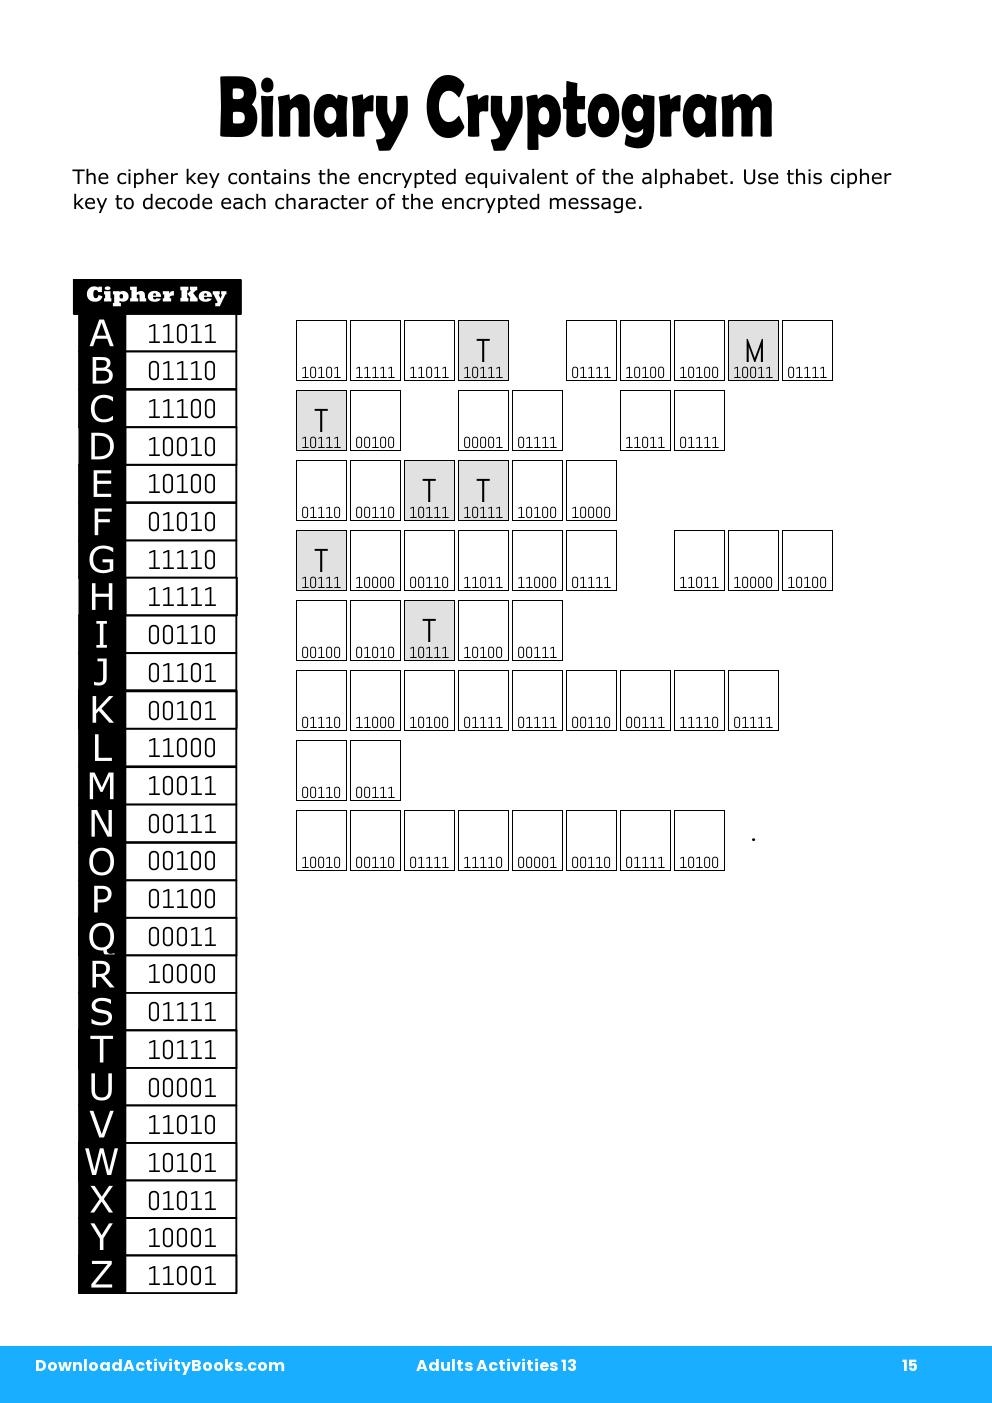 Binary Cryptogram in Adults Activities 13